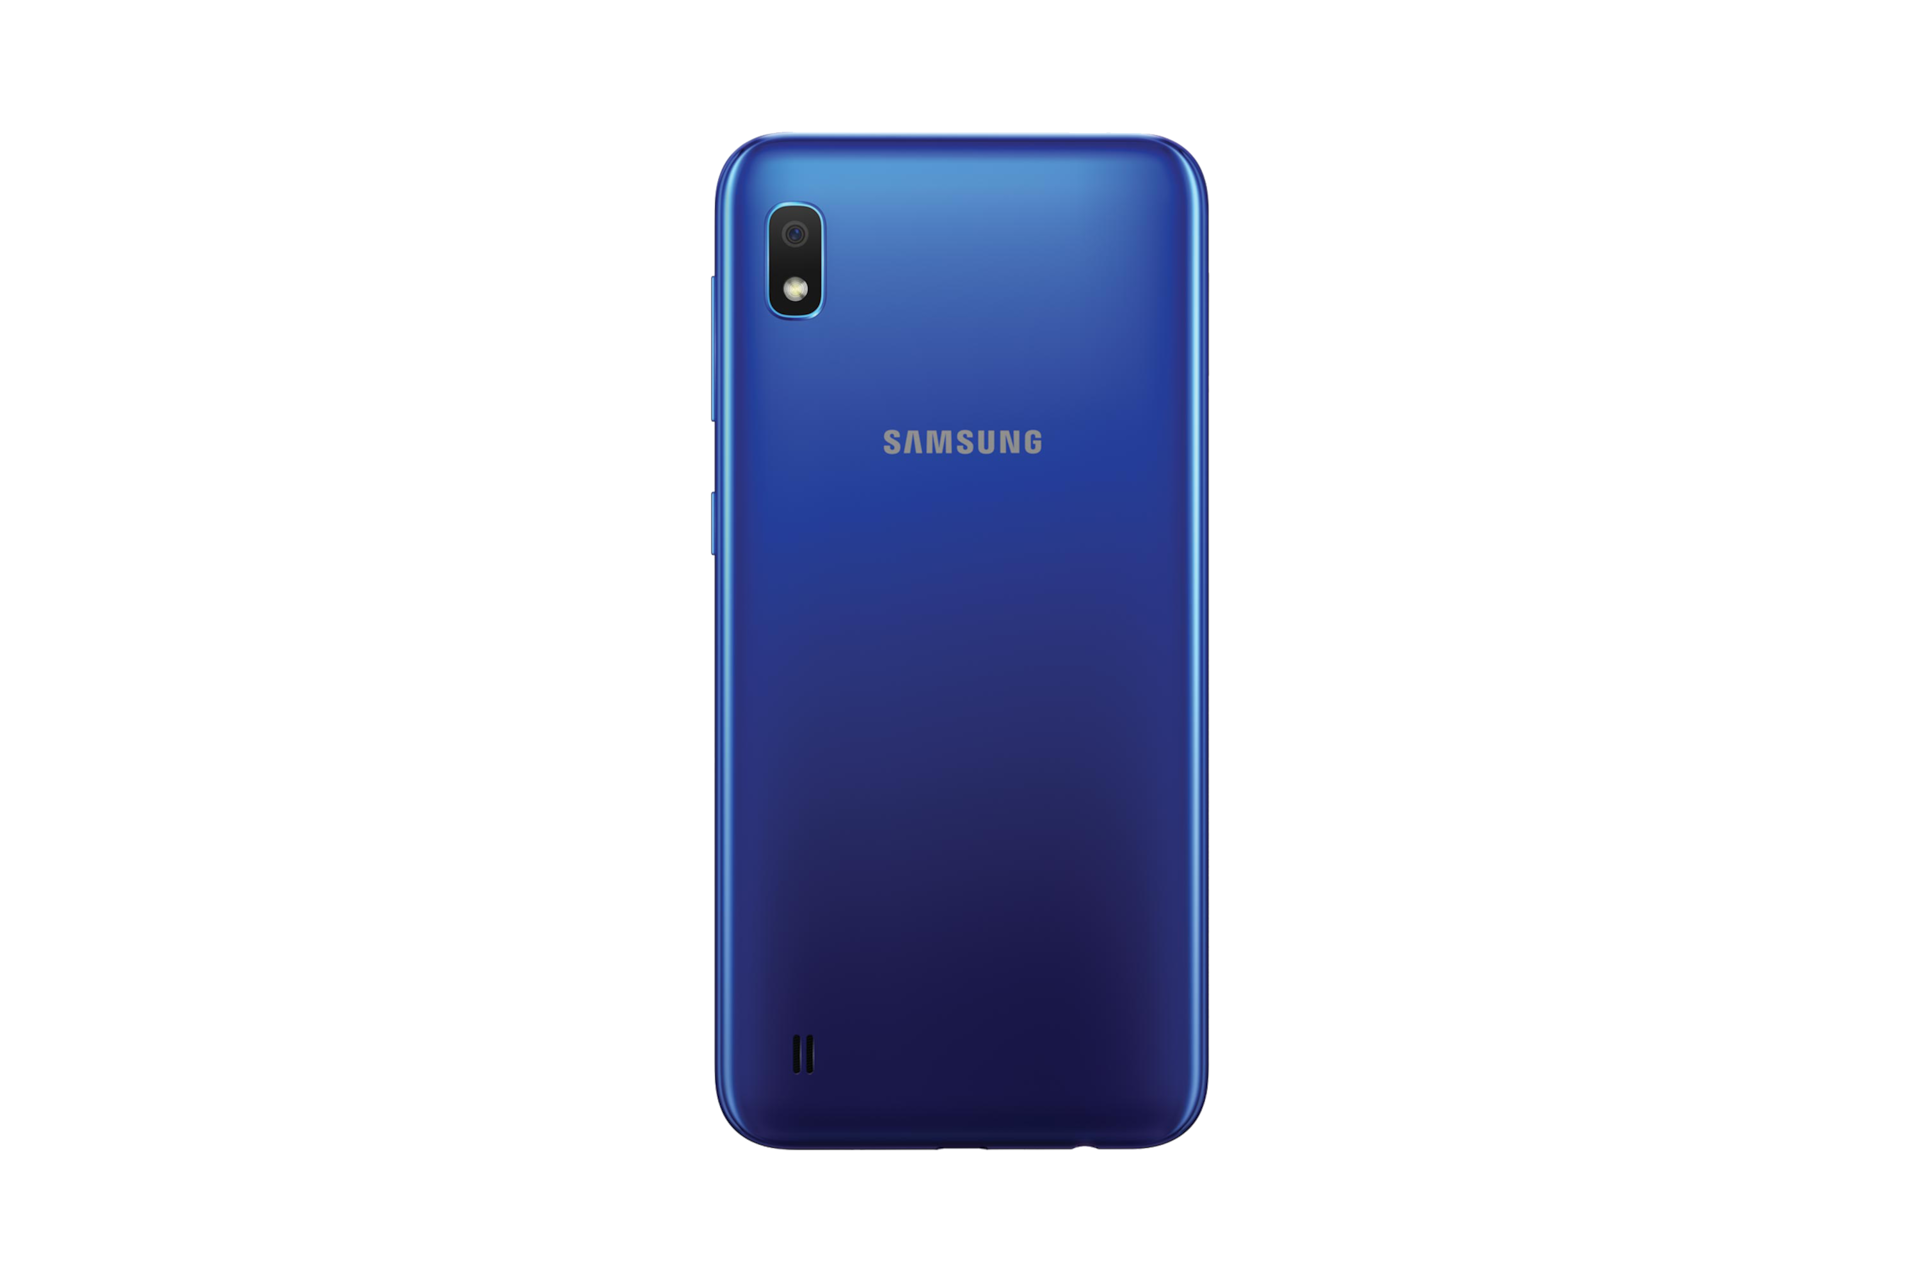 Samsung Galaxy A10 2GB RAM (Blue) - Price, Features, Specs ...